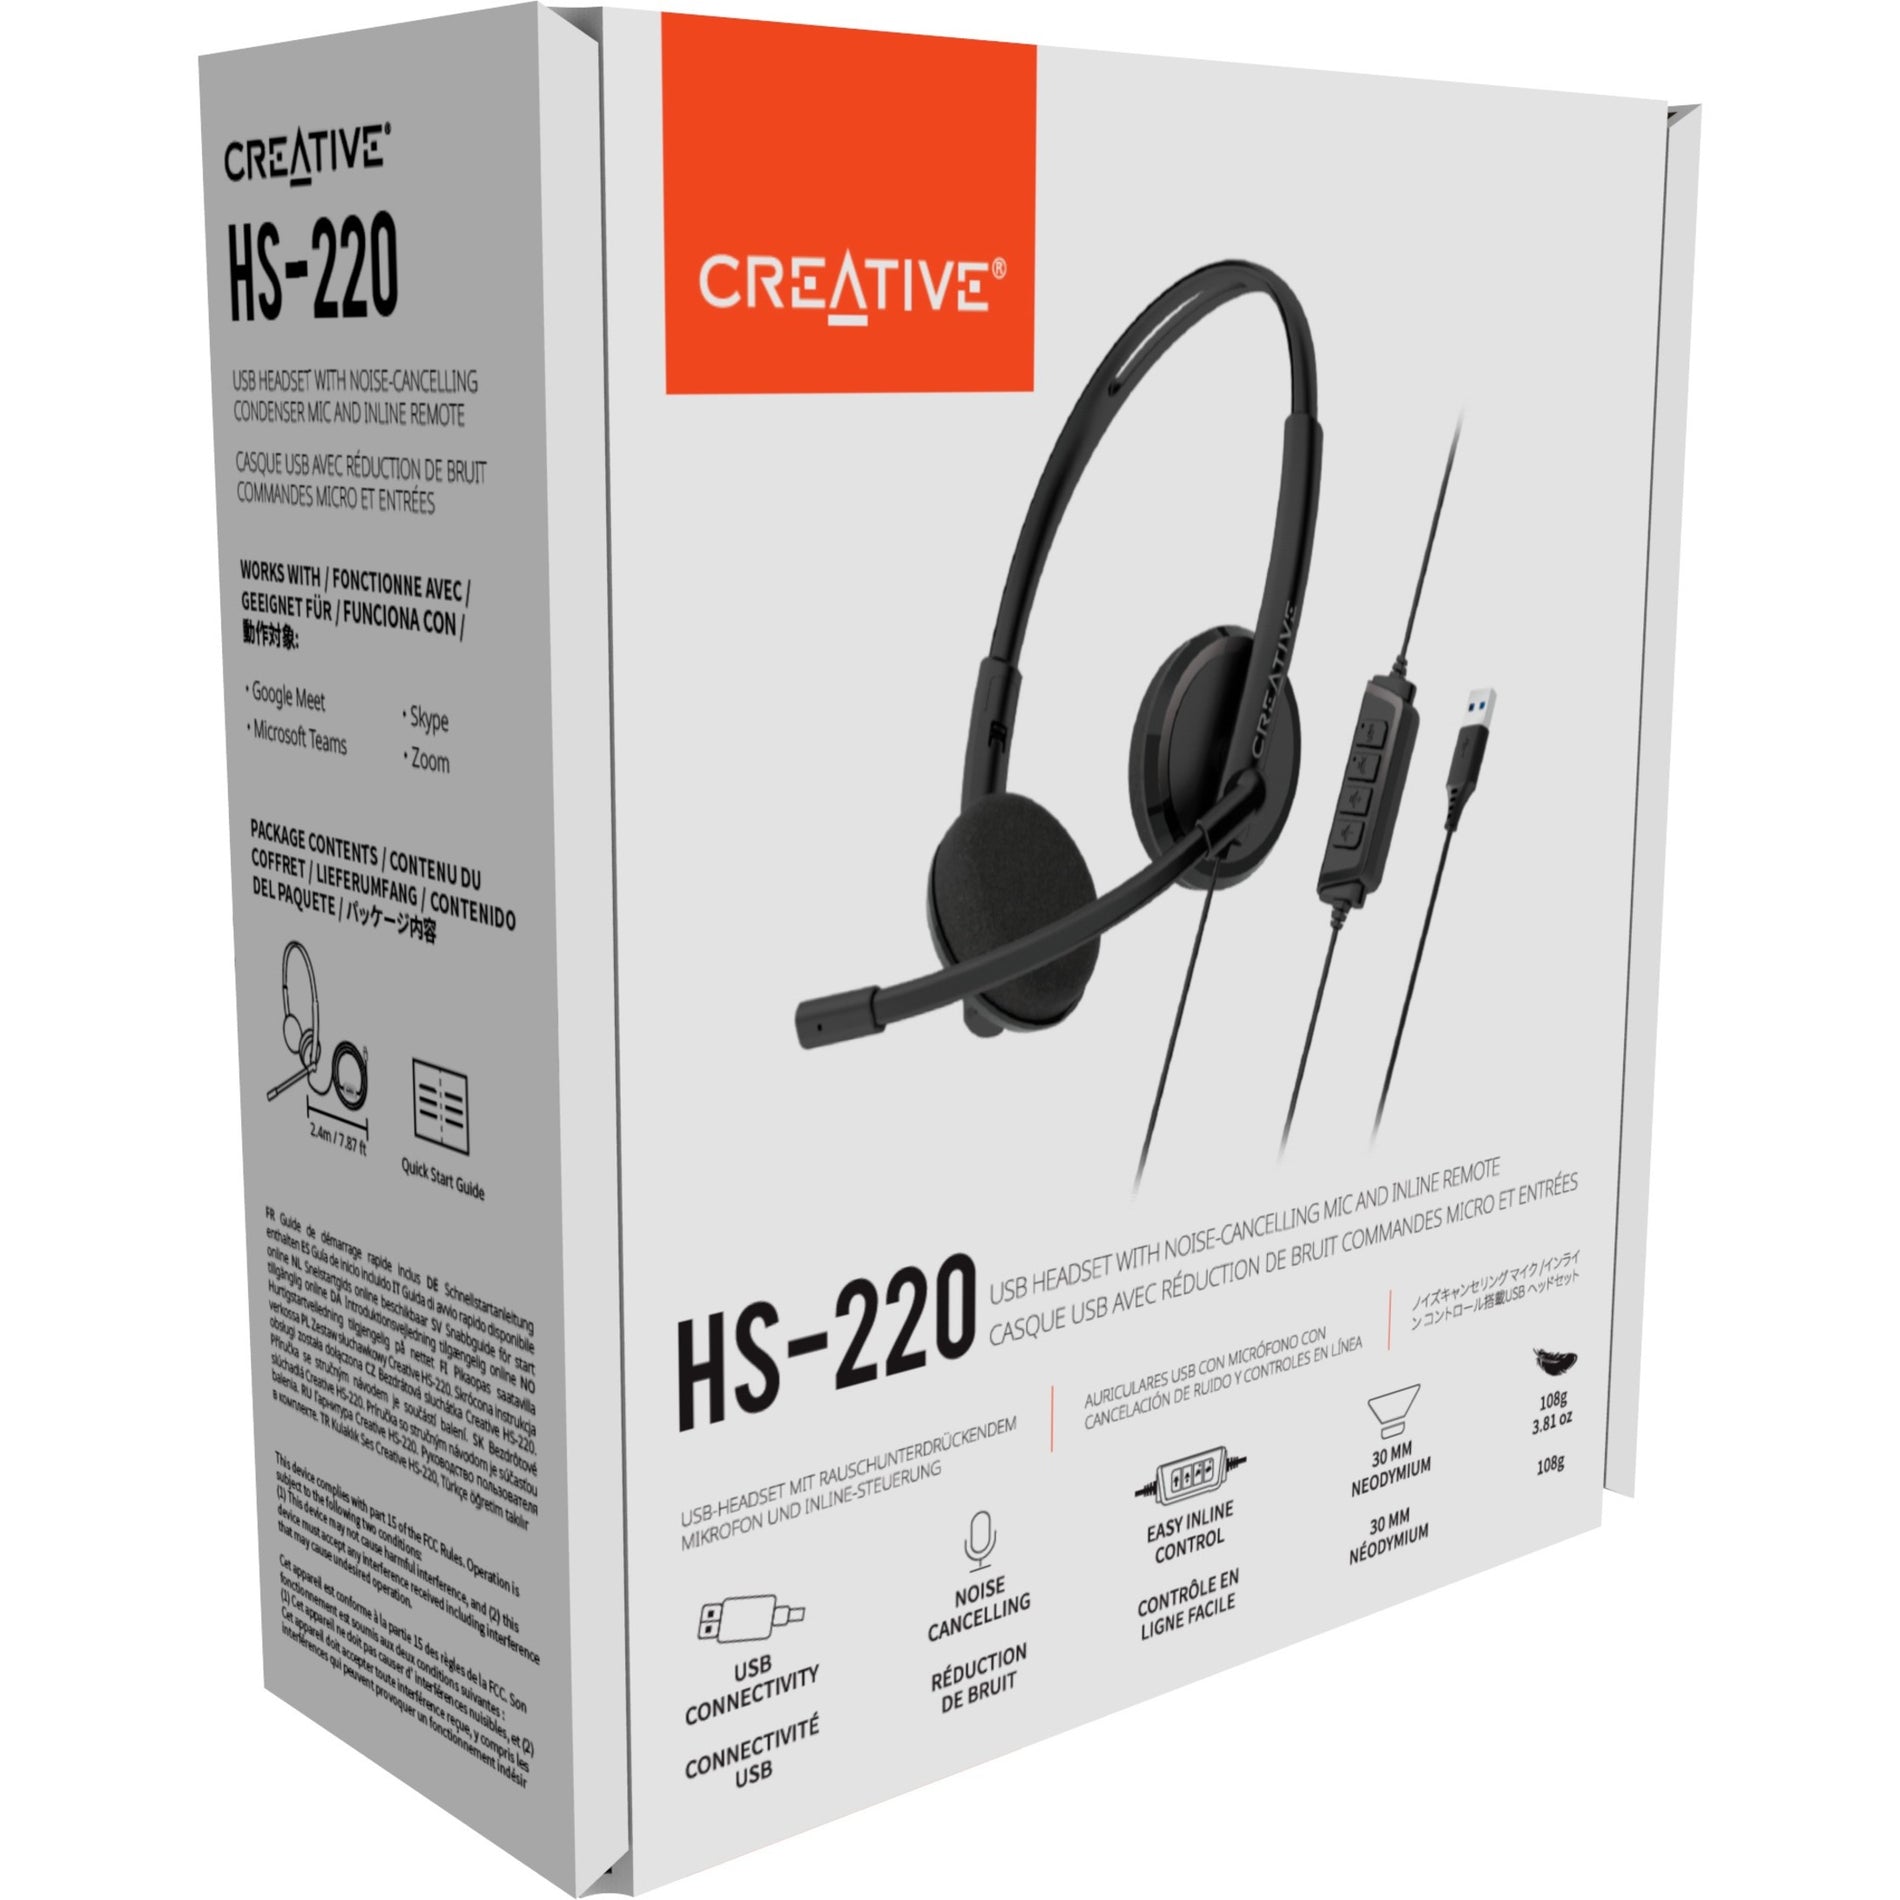 Creative 51EF1070AA001 HS-220 USB Headset with Noise-Cancelling Mic and Inline Remote, Binaural, Over-the-head, PC/Mac Compatible